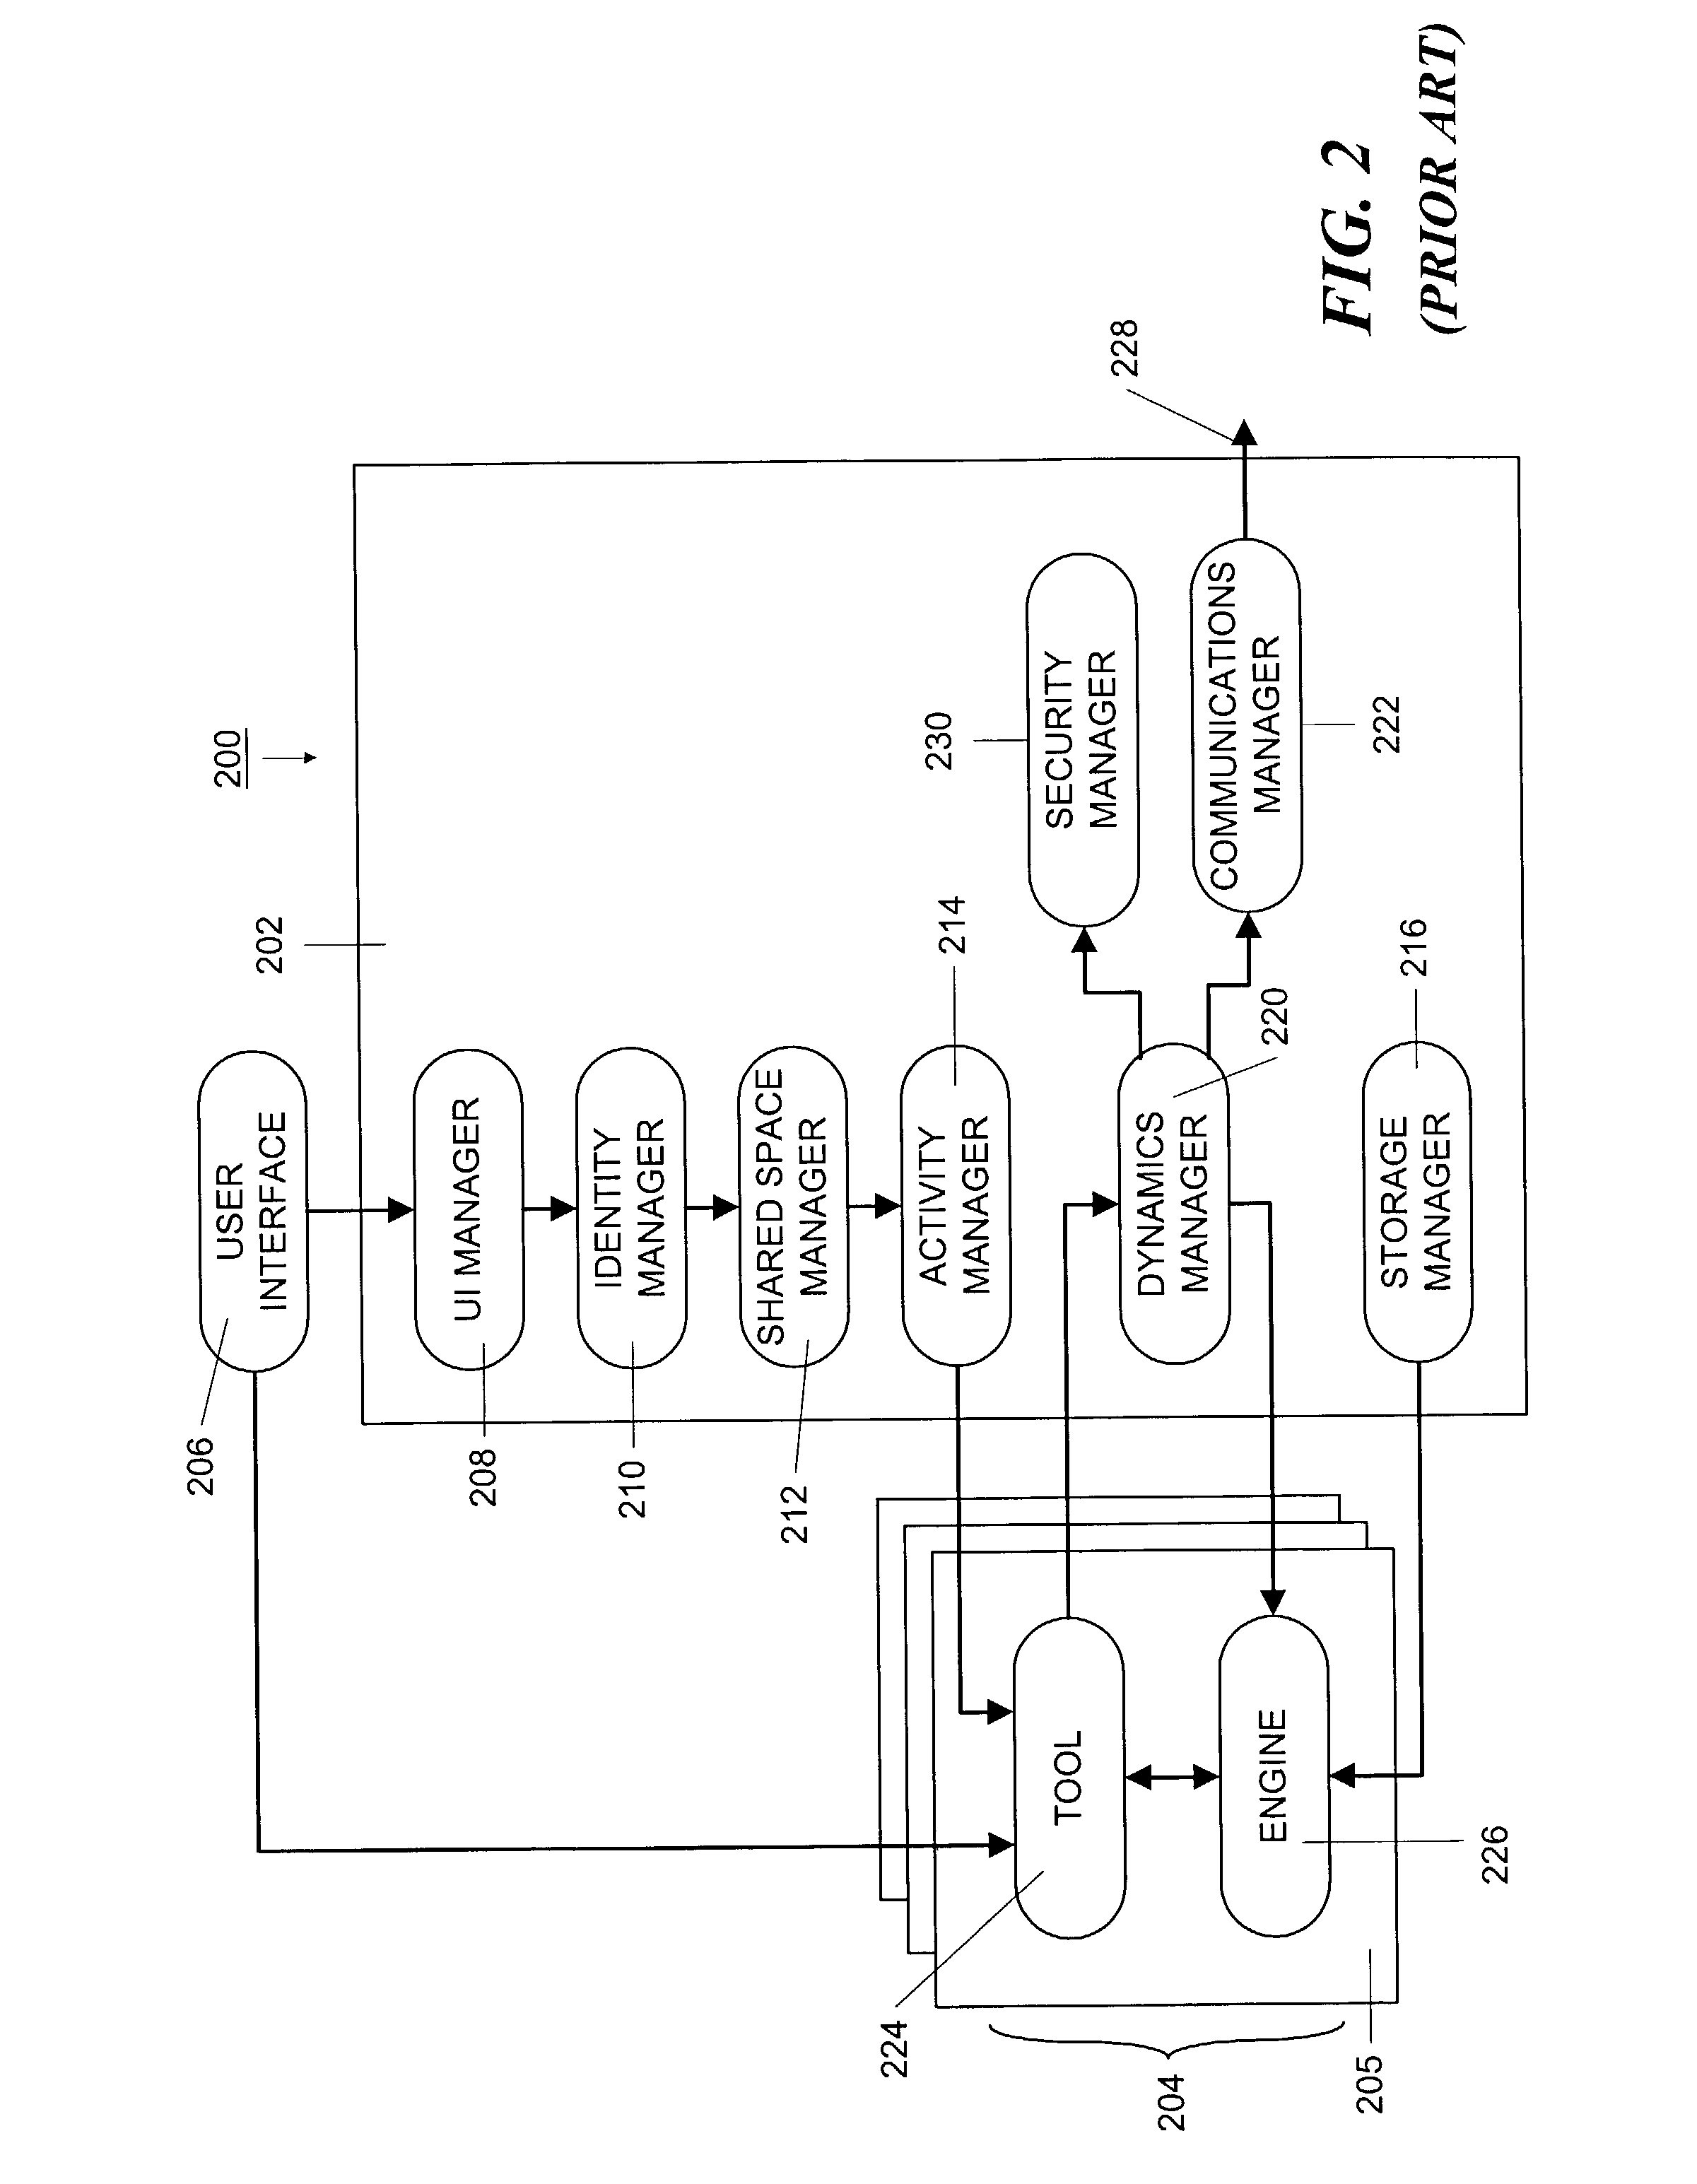 Method and apparatus for maintaining consistency of a shared space across multiple endpoints in a peer-to-peer collaborative computer system